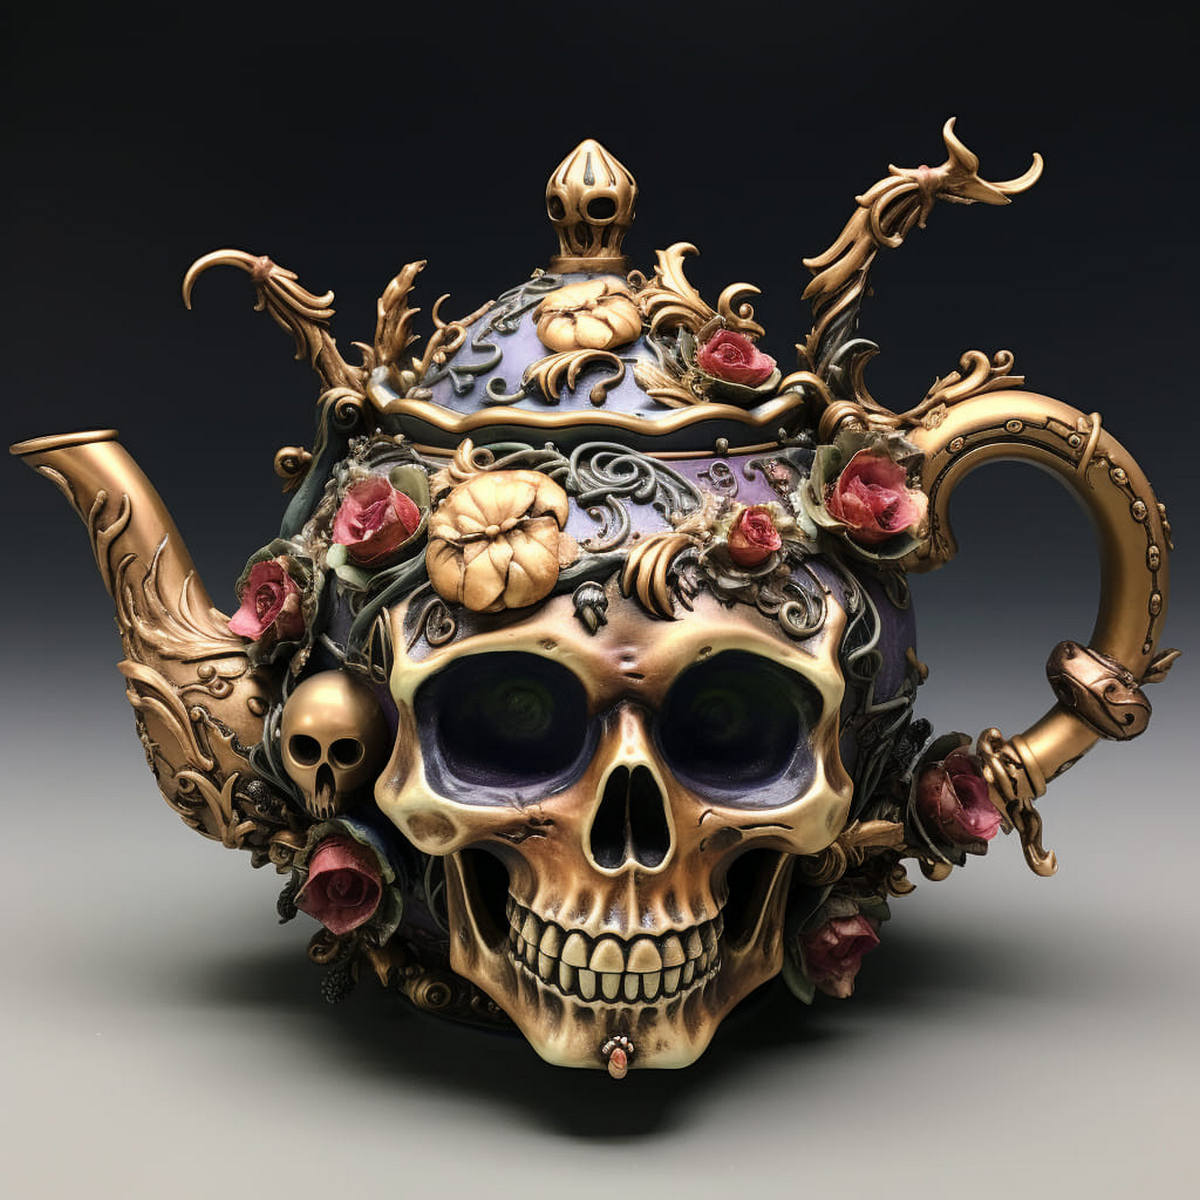 Creating Iconic Halloween Teapots in New England the Skull